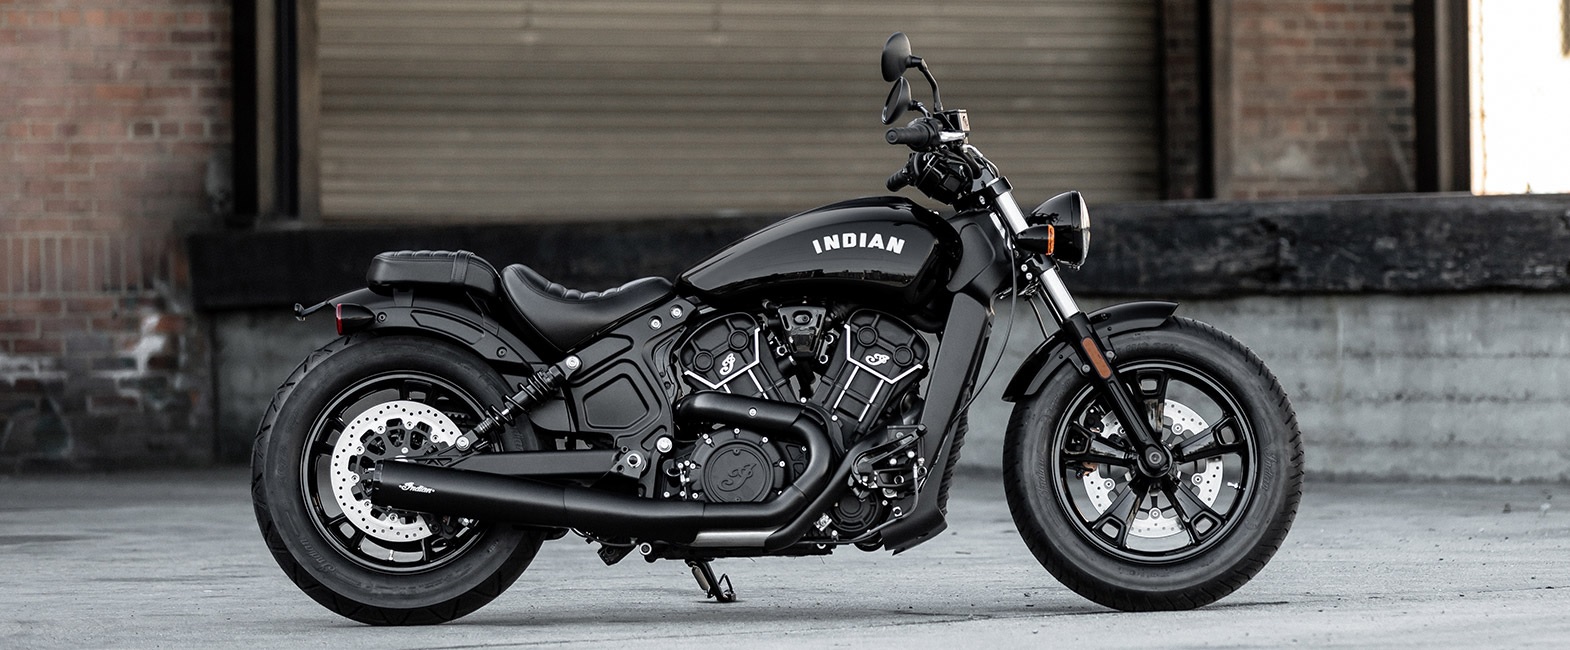 The Indian Scout Sixty Bobber Is The Latest In A Rising Trend